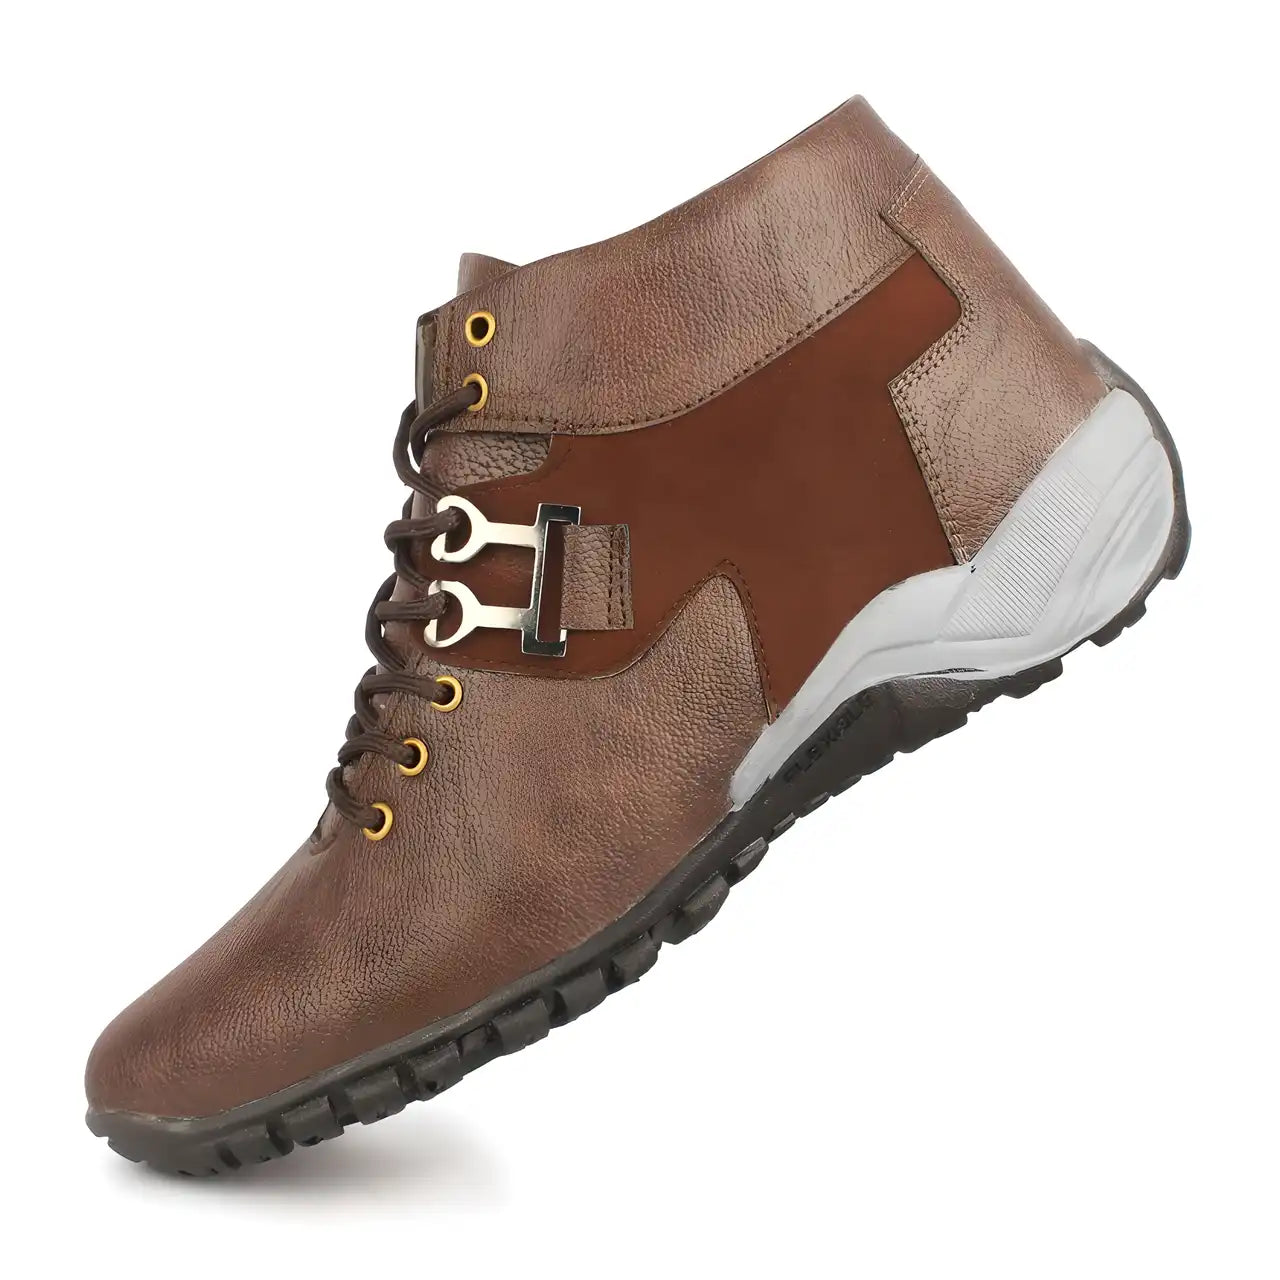 Fashionable 300 Boot Shoes for Men